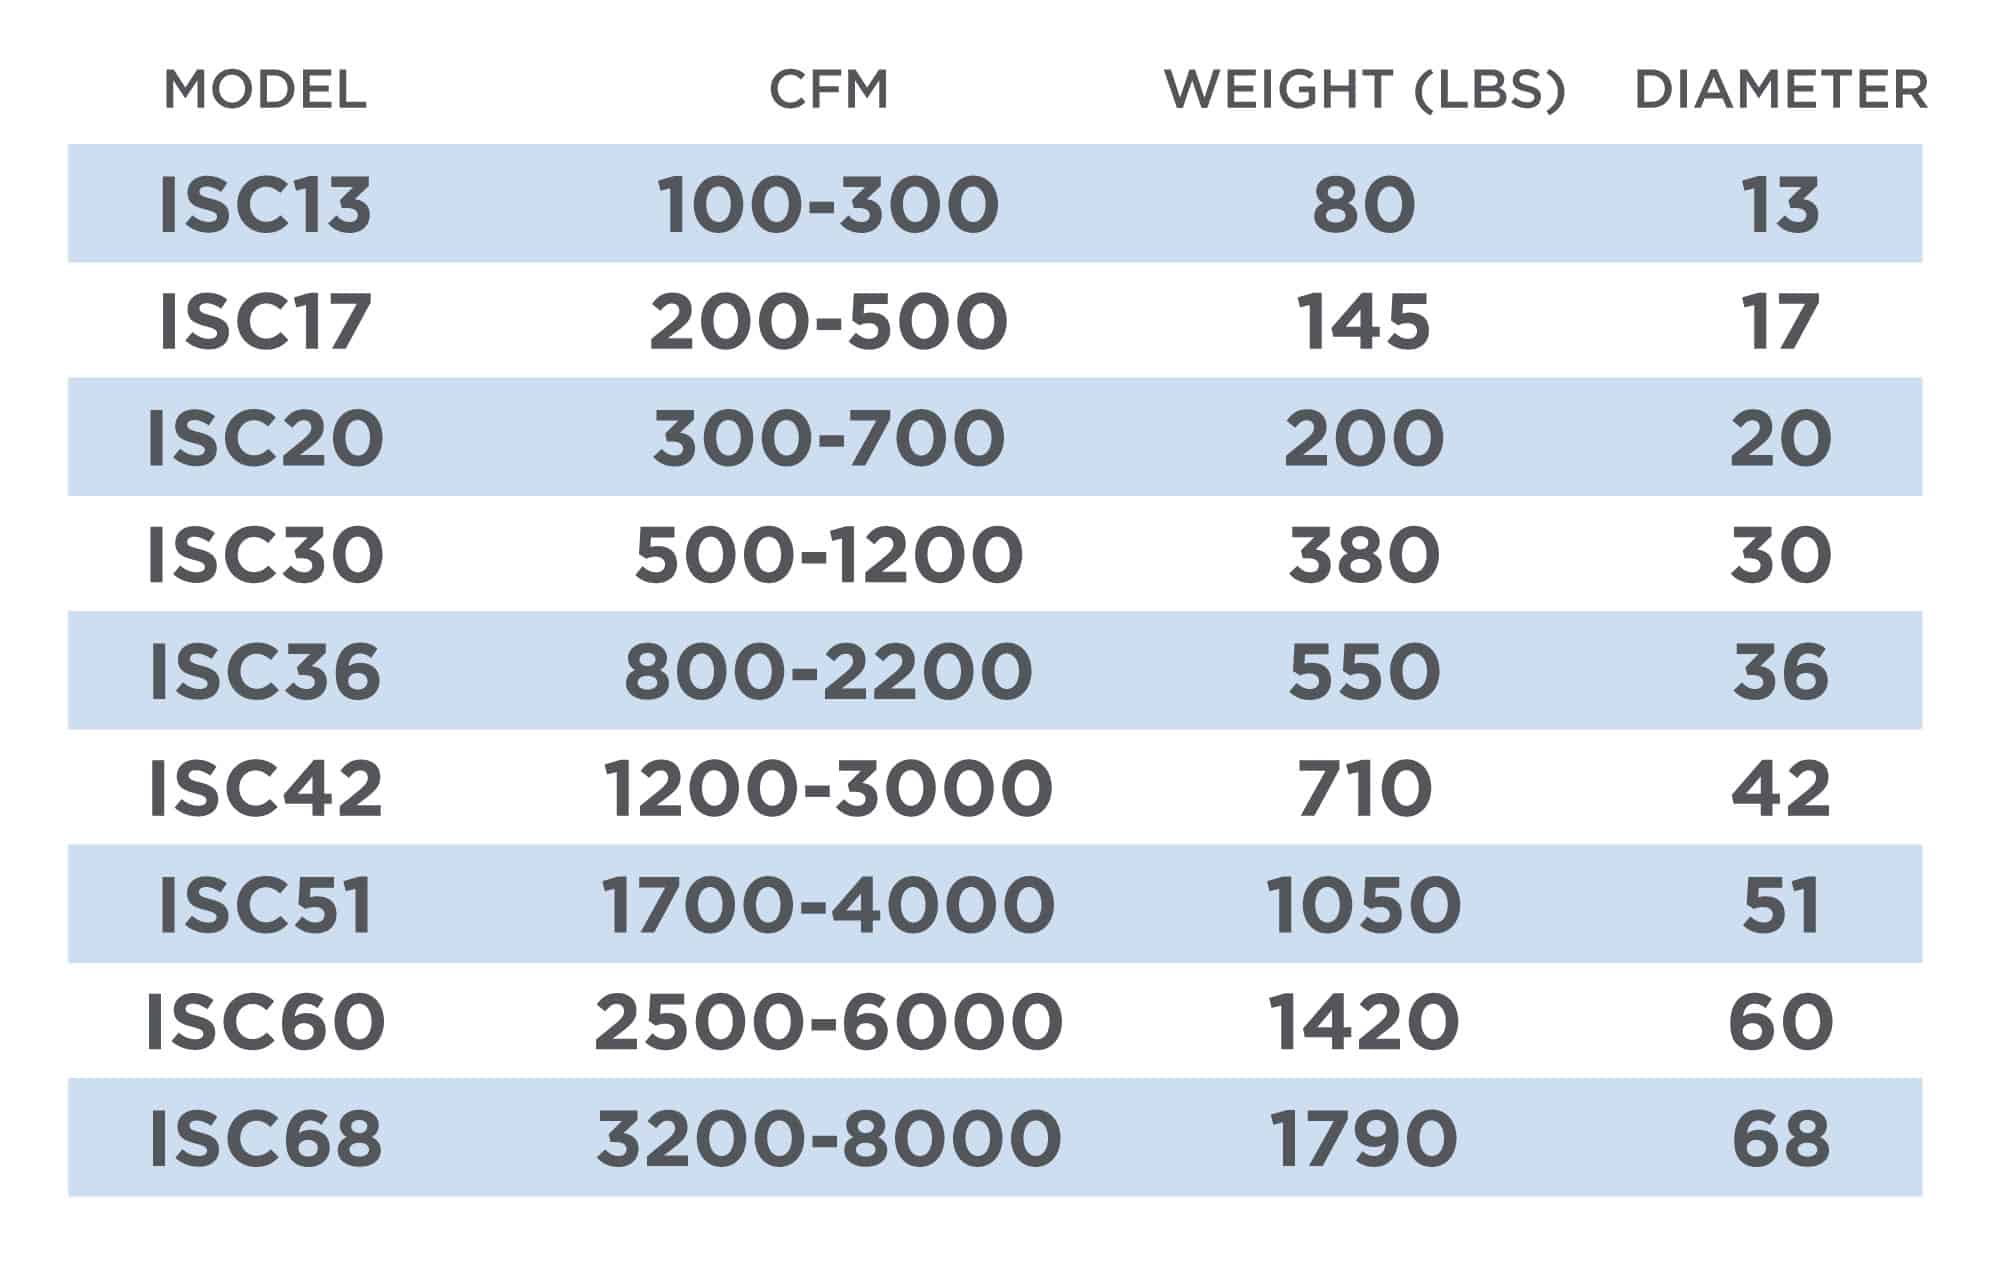 Standard efficiency cyclone models with CFM ratings and weights